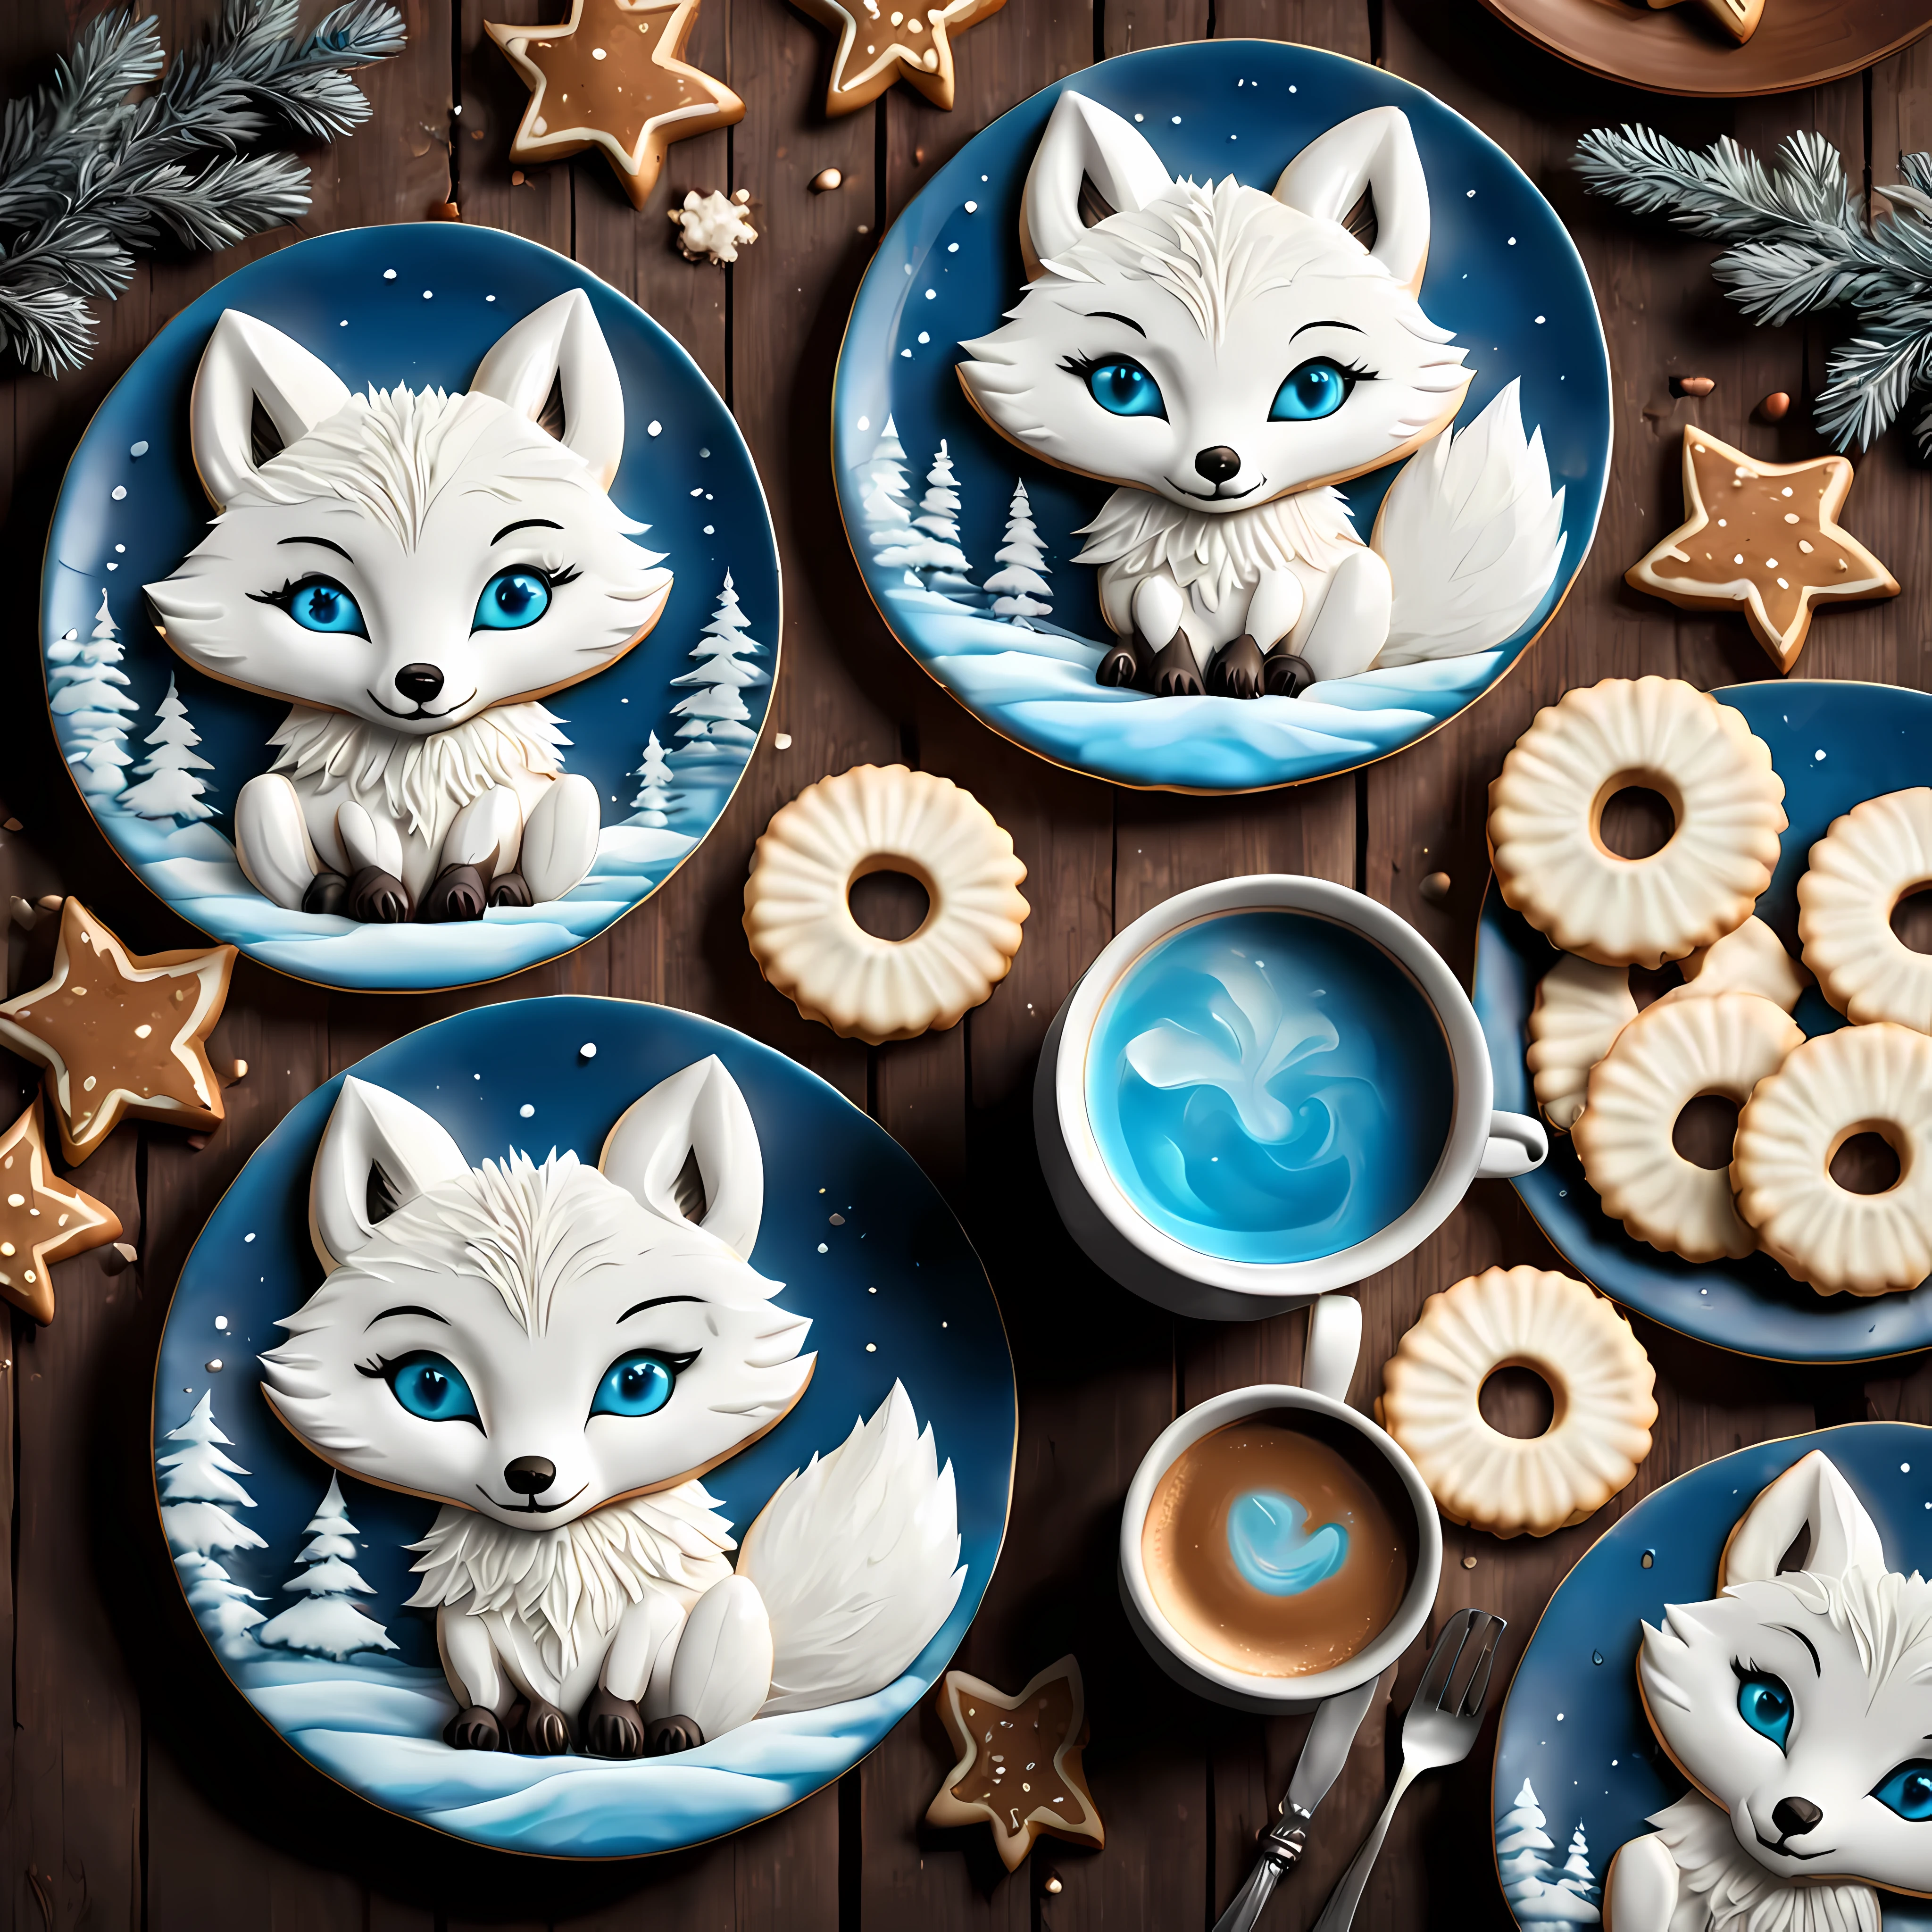 Cute cartoon style, masterpiece in maximum 16K resolution, close up of majestic cookies (shaped as arctic foxes). | (On an elegant rustic plate), a hot coffee. | Vivid blue eyes, delicate nature ornate. | ((More_Details))